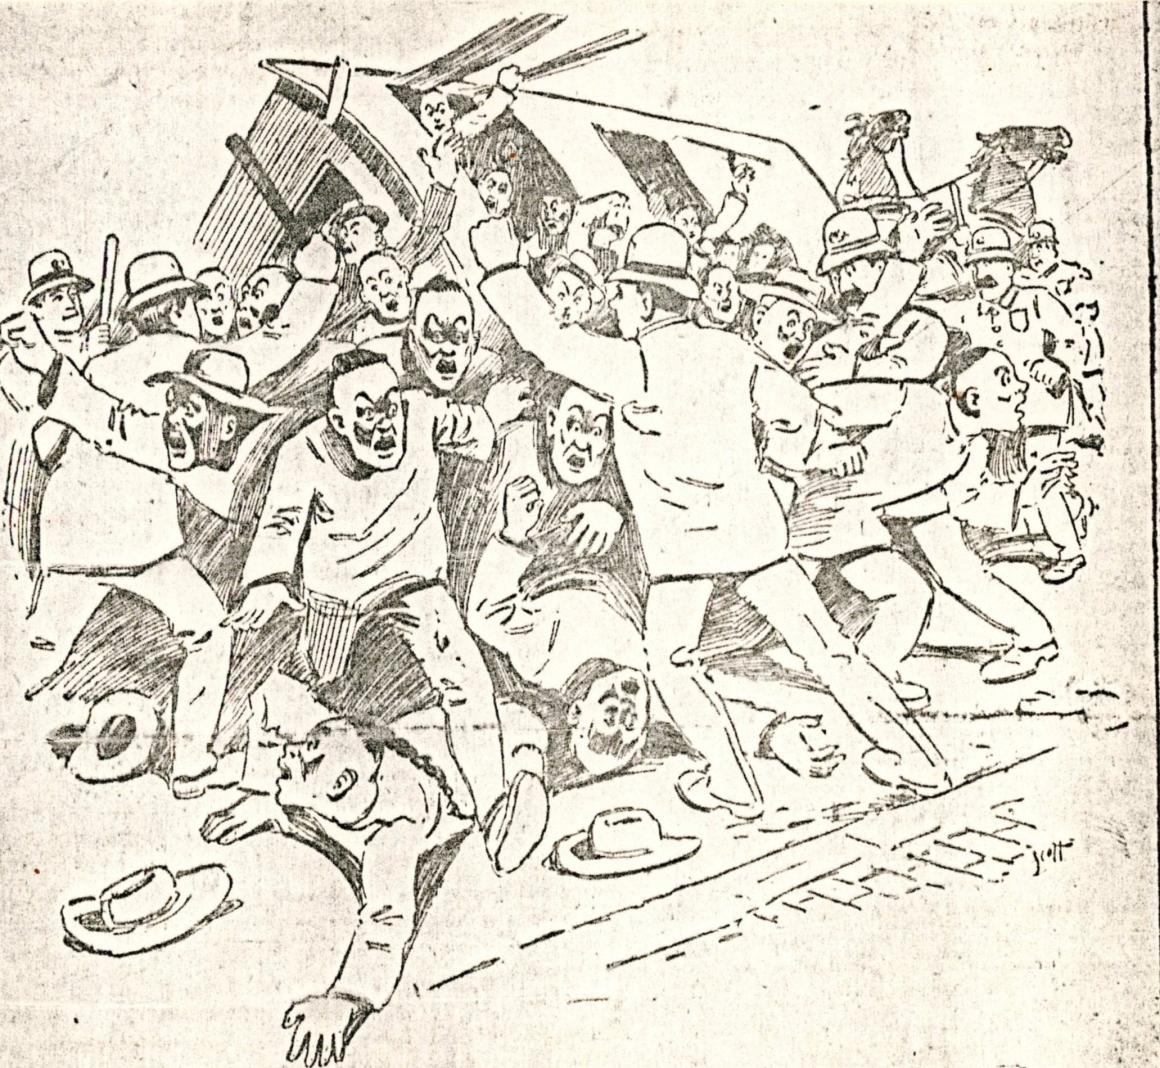 Boston Post political cartoon depicting the arrest of sixty men on grounds of their "illegal" status